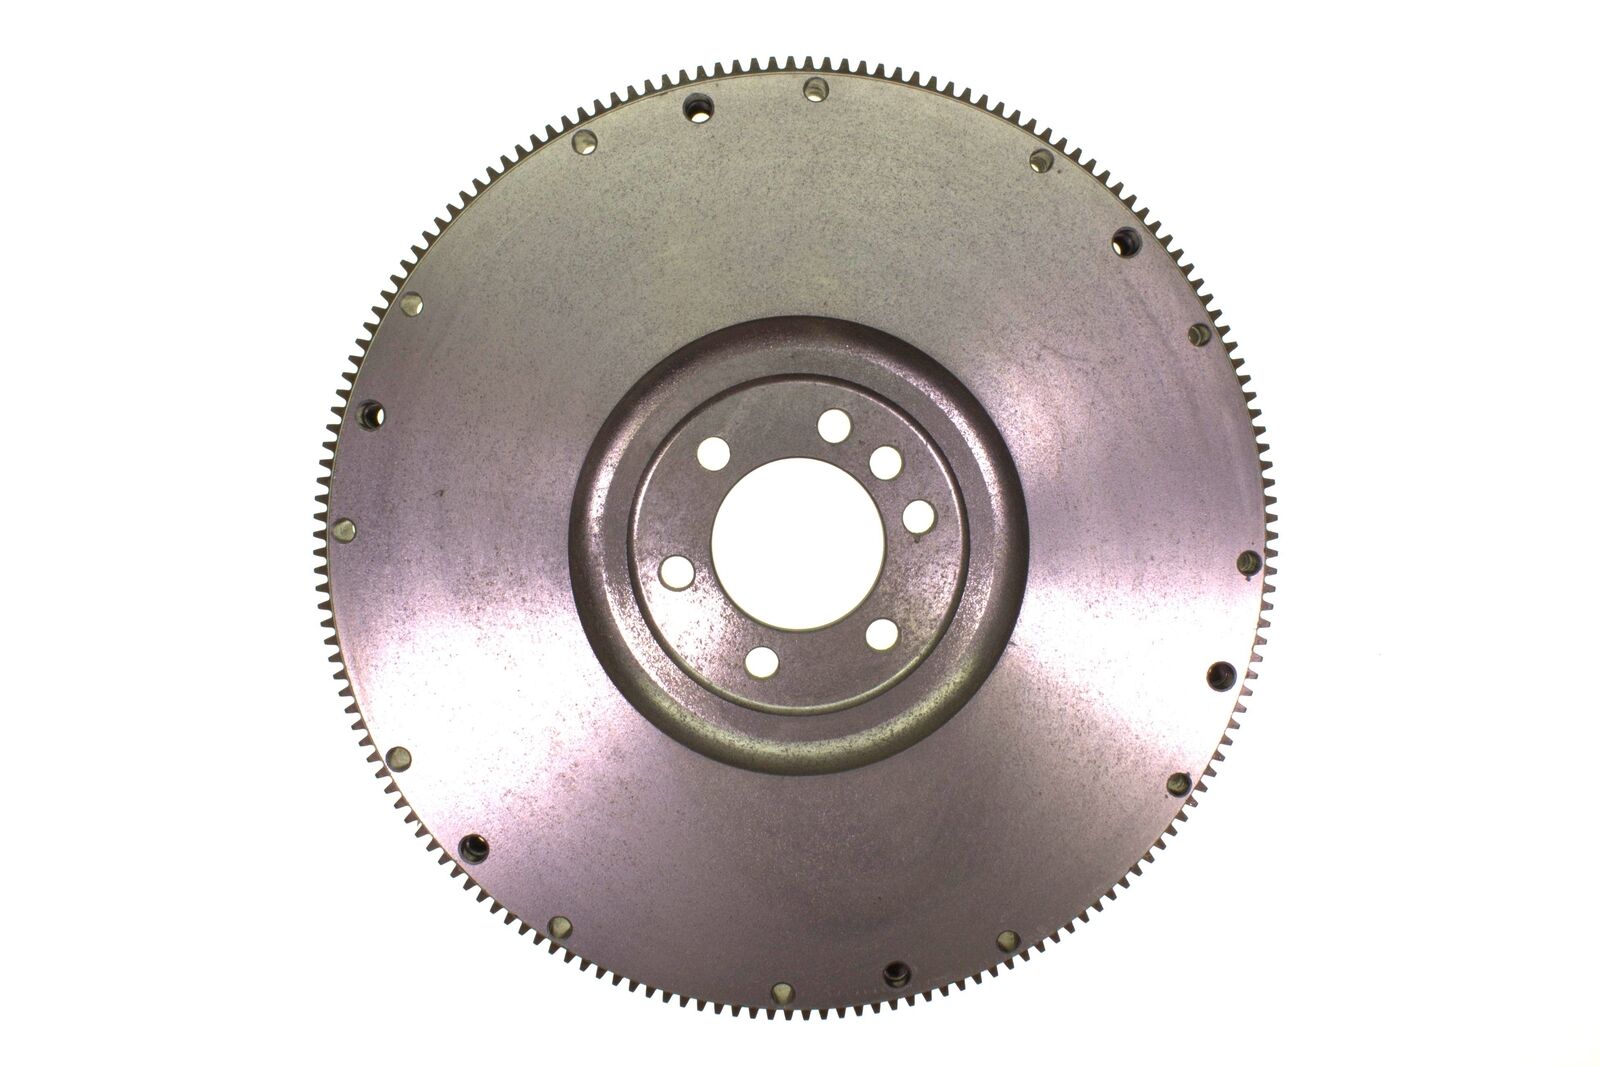 SACHS NFW1041 Clutch Flywheel for Chevrolet C30 1975 - 1986 & Other Vehicles